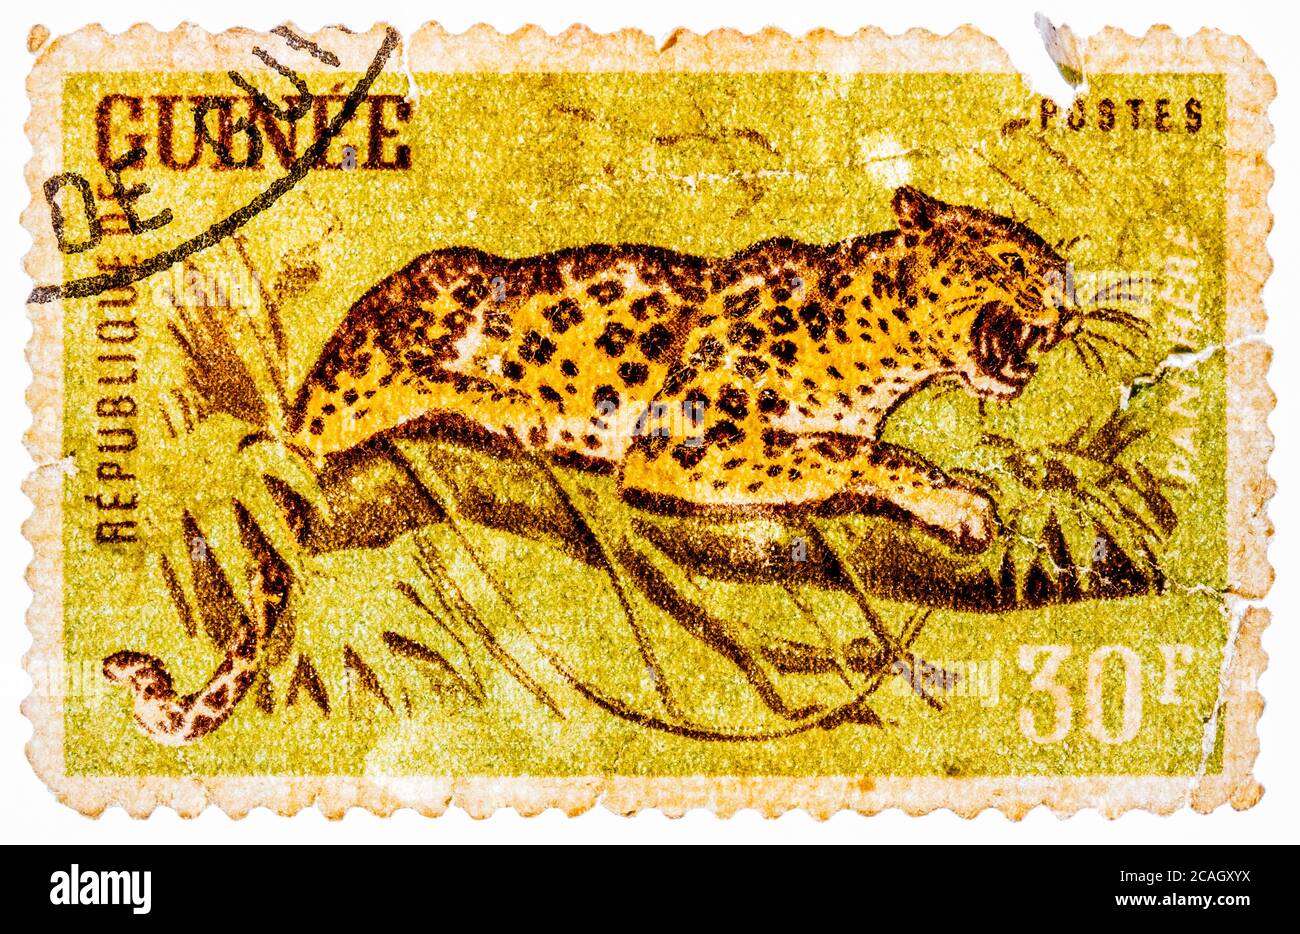 Stamp printed in Guinea from the 'Wild Animals' issue shows a Leopard (Panthera pardus) Stock Photo